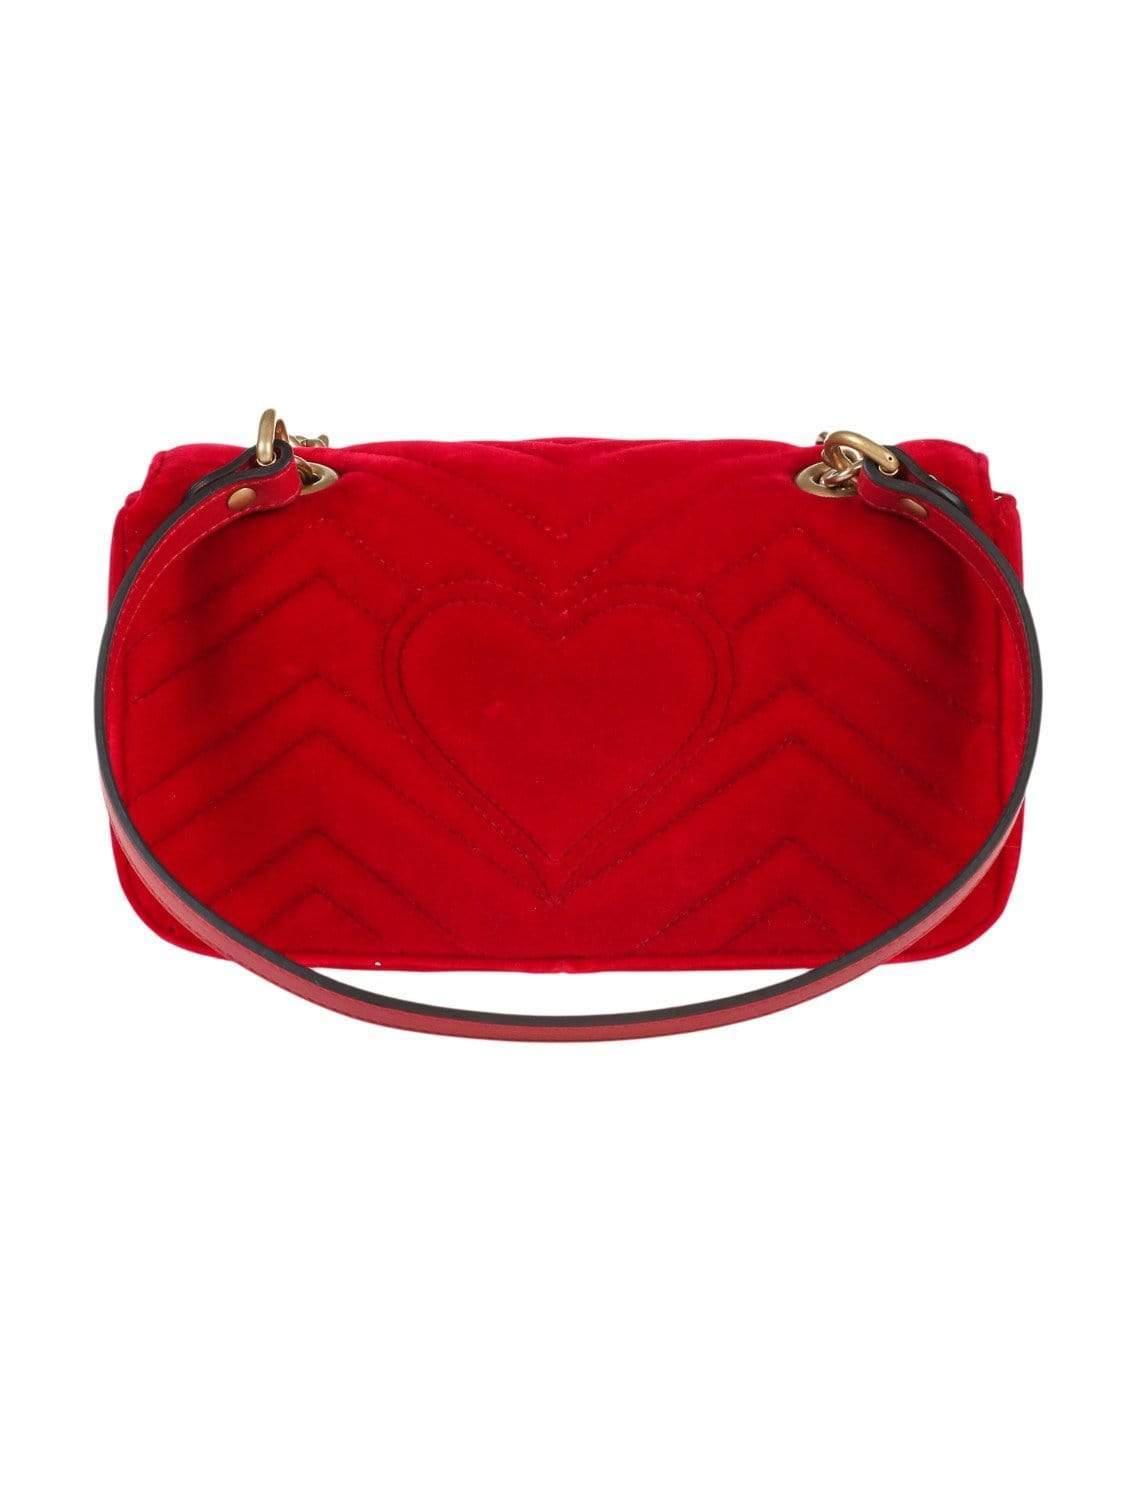 Gucci Marmont Mini Gg Bag In Red Velvet With Chevron Pattern And Heart On The Back - Lyst